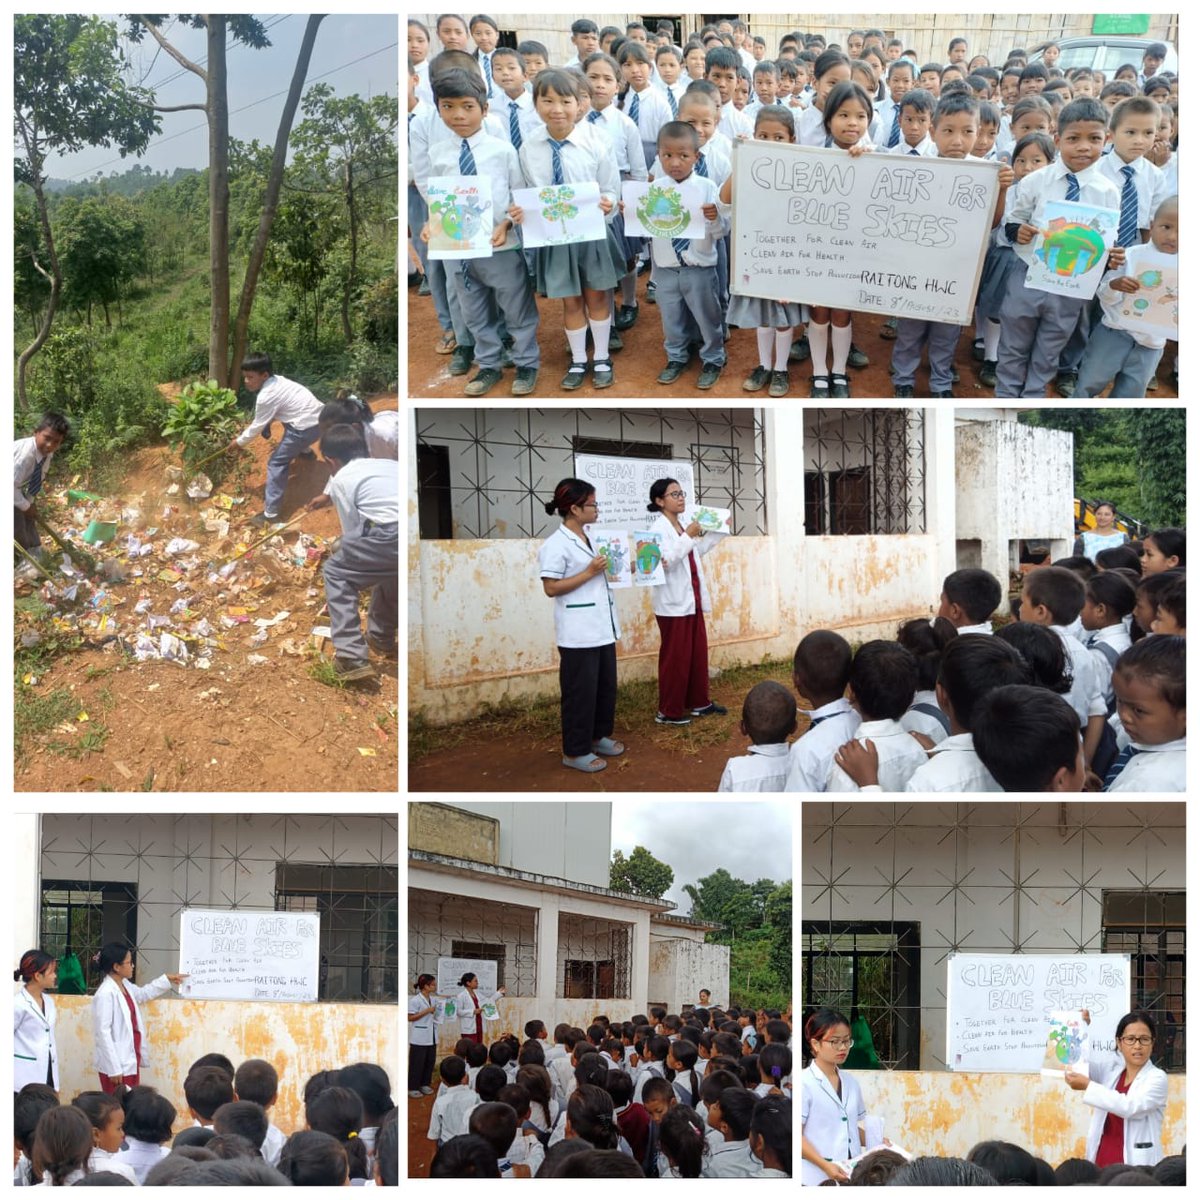 Clean Air for Blue Skies Campaign being actively participated by students of Manik Raitong LP School under Raitong HWC #RiBhoi.
#TogetherForCleanAir #HealthyAir #HealthyLife #HealthForAll #MeghalayaForHealth #MeghalayaForCleanAir #AirPollution #CleanAirForAll #CleanAirMatters